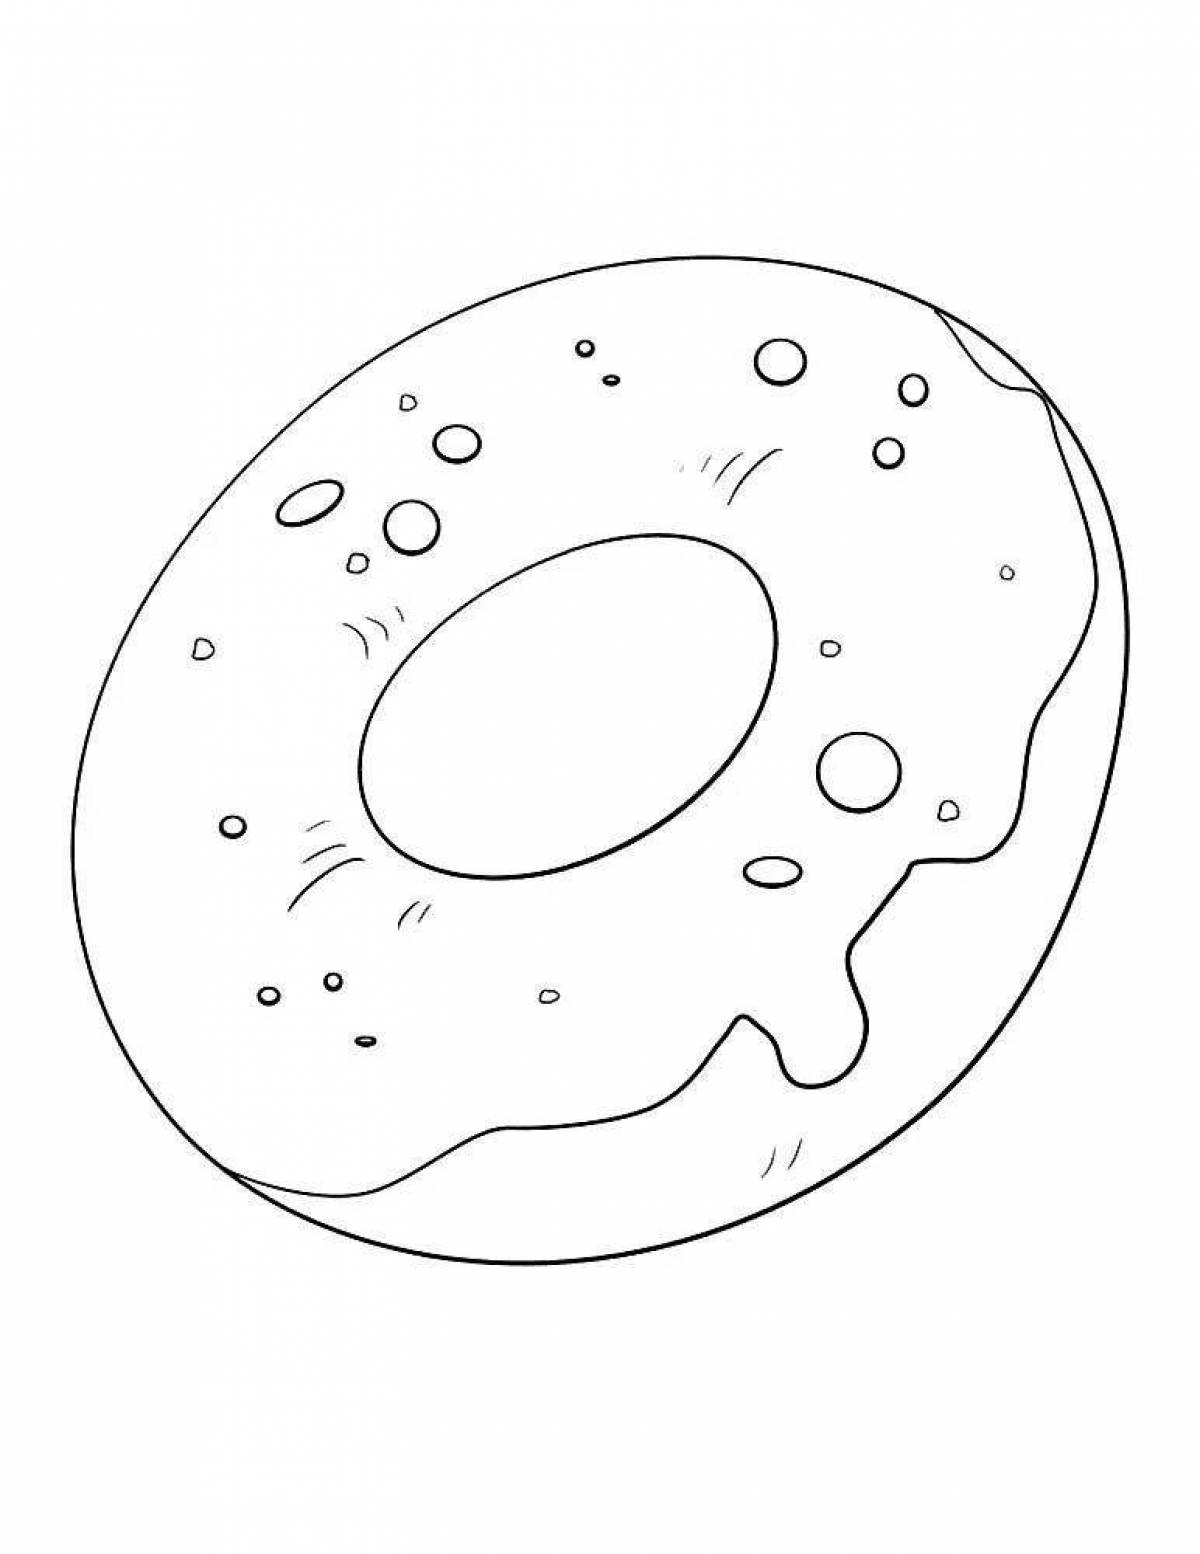 Holiday coloring of donuts for kids